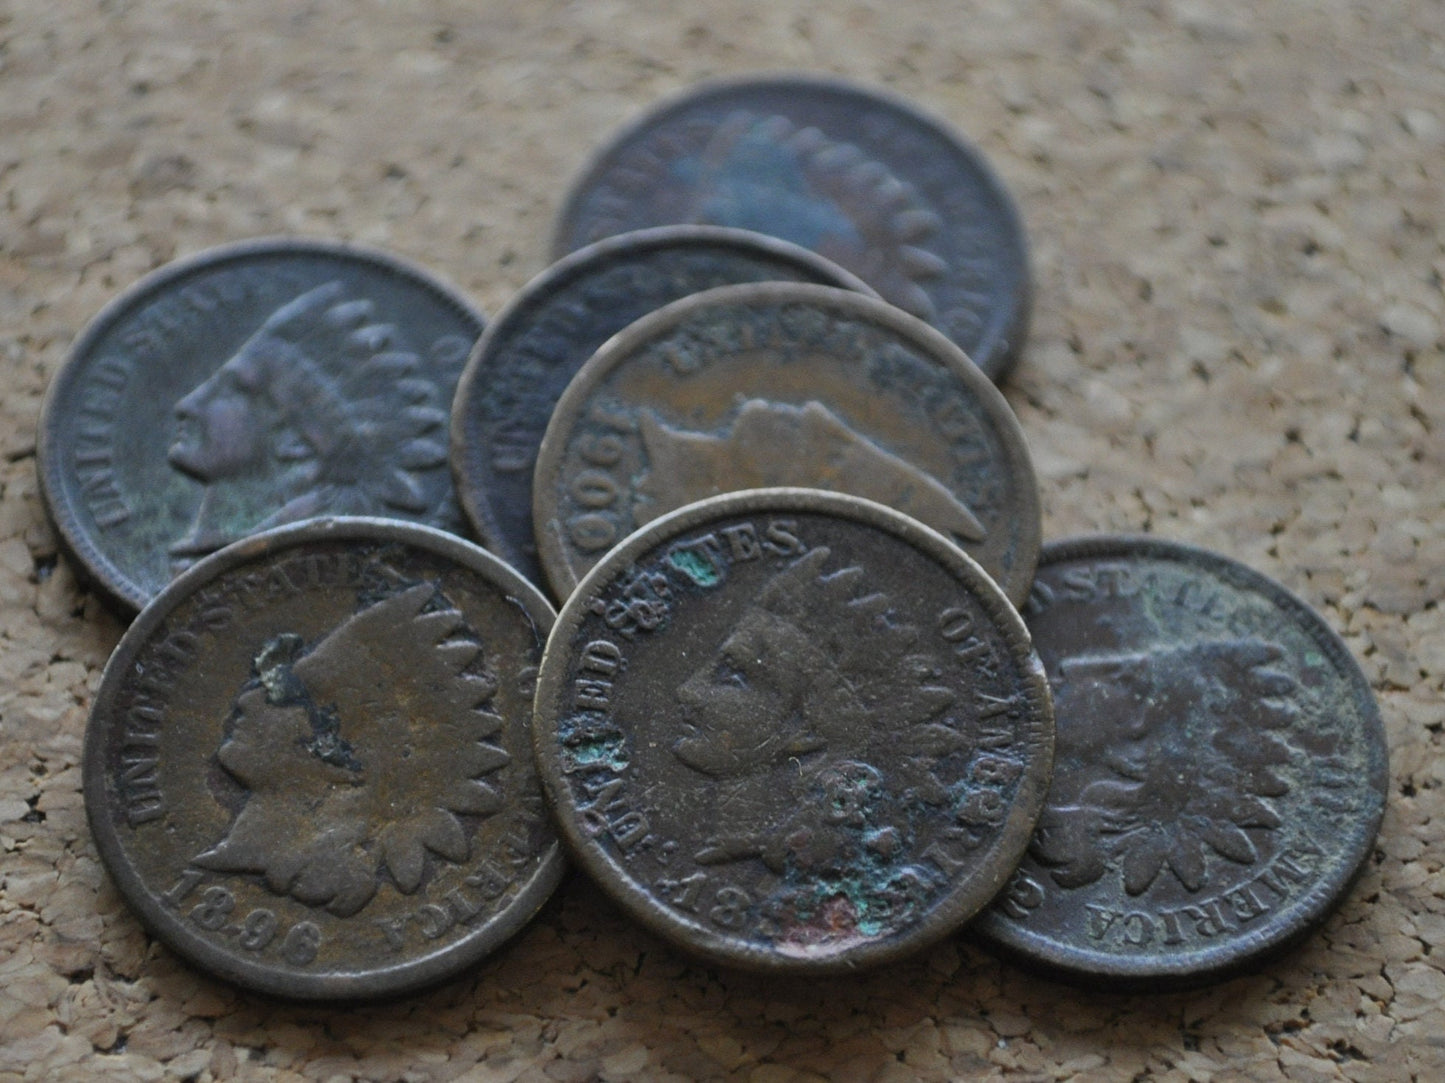 Lot of 10 Indian Head Pennies - Lower grade due to damage, corrosion or stuck on gunk - Unsearched / uncleaned